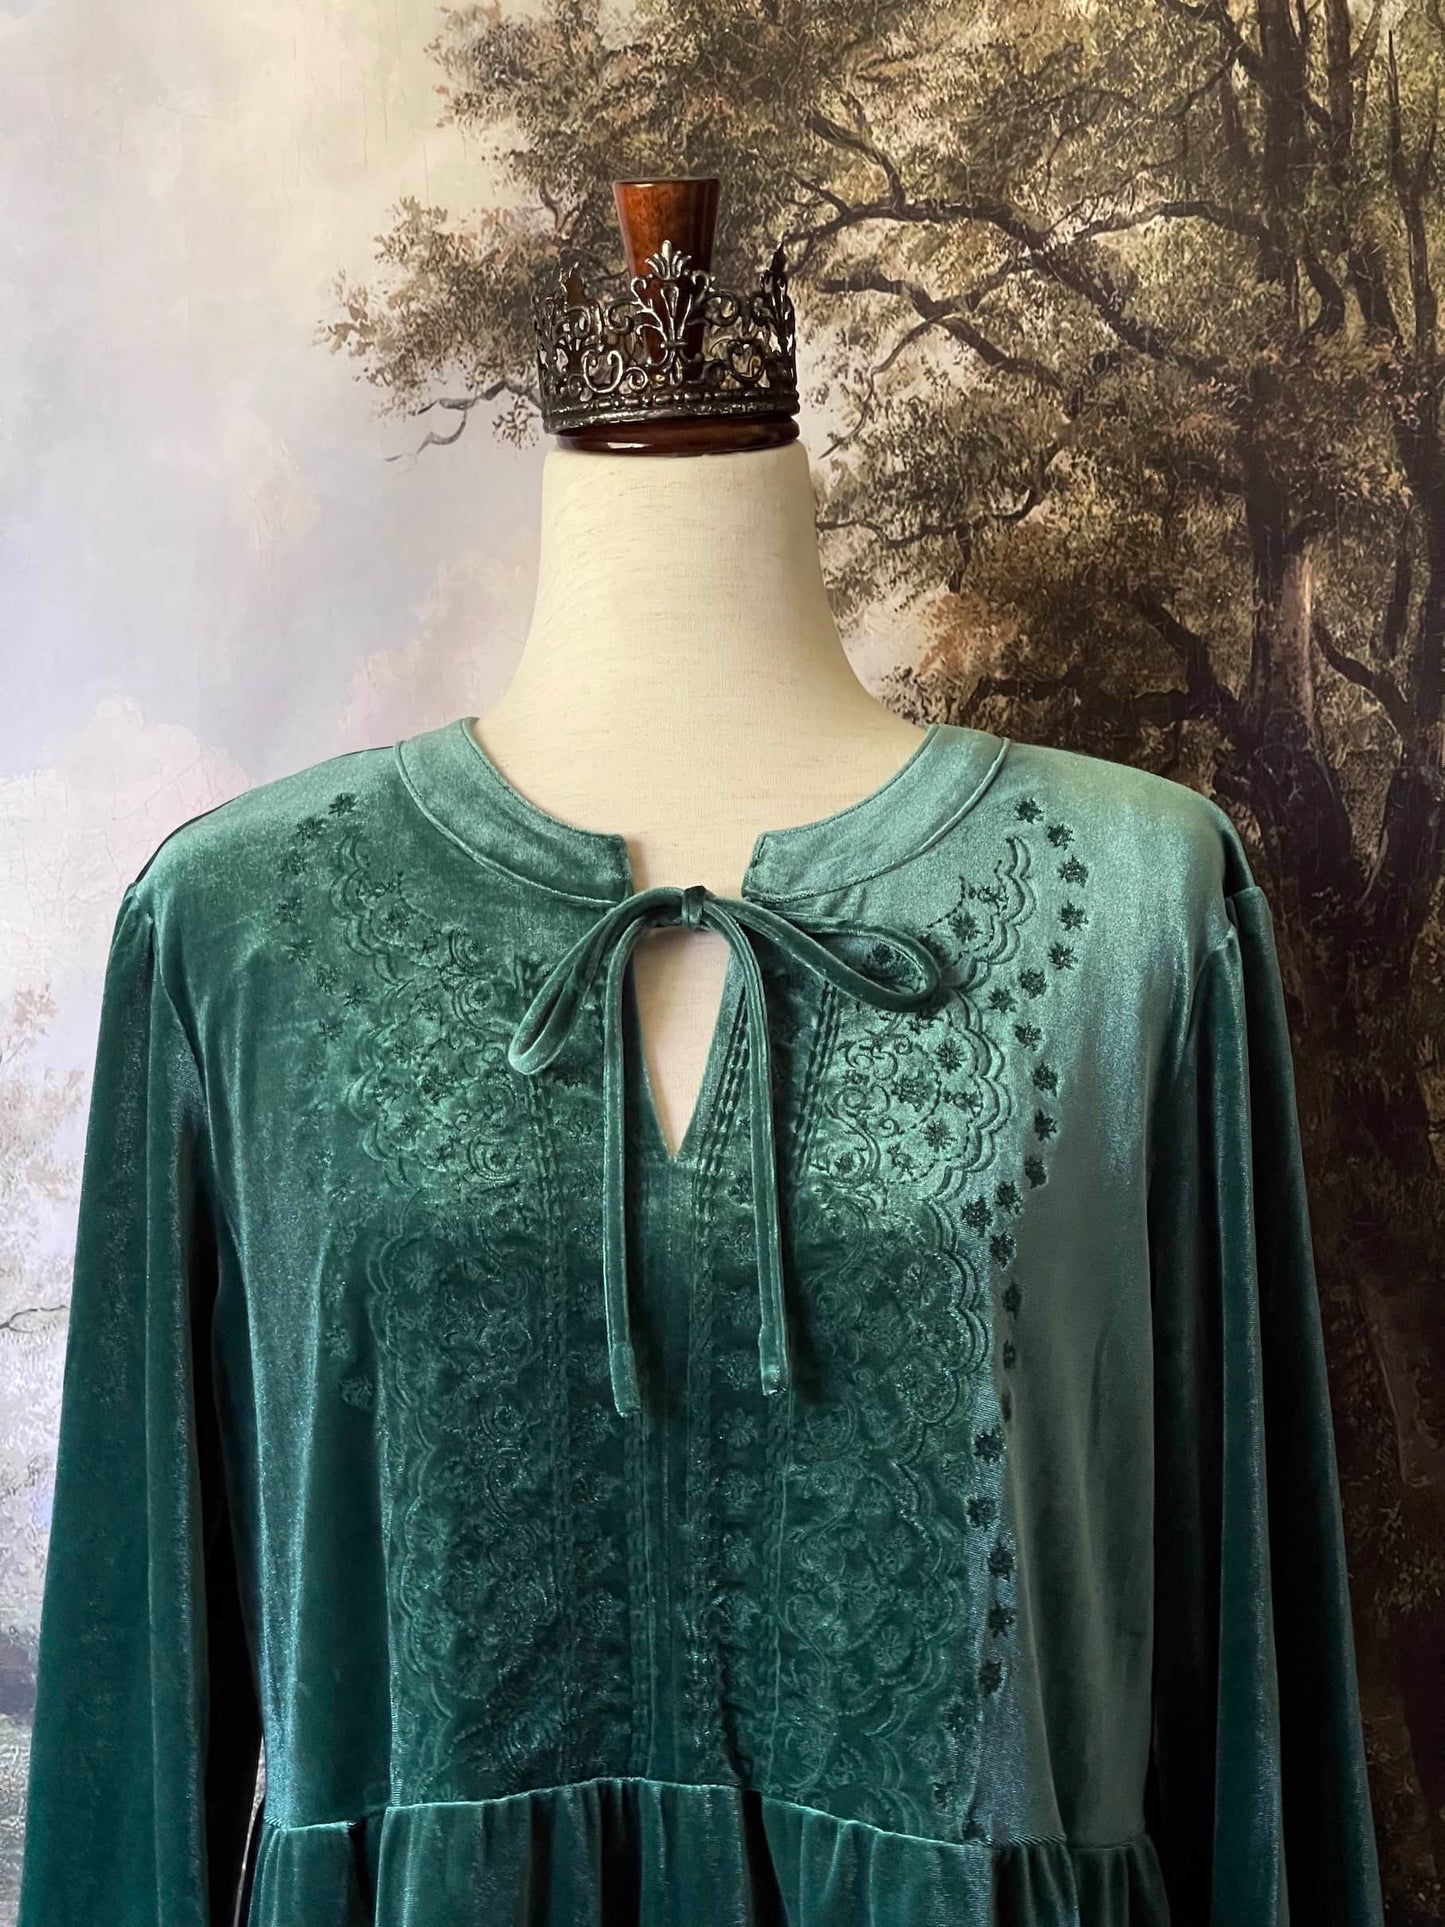 A Medieval Fantasy Floral Embroidery Velour Tunic in Emerald Green is pictured on a mannequin in front of a forested fantasy backdrop.